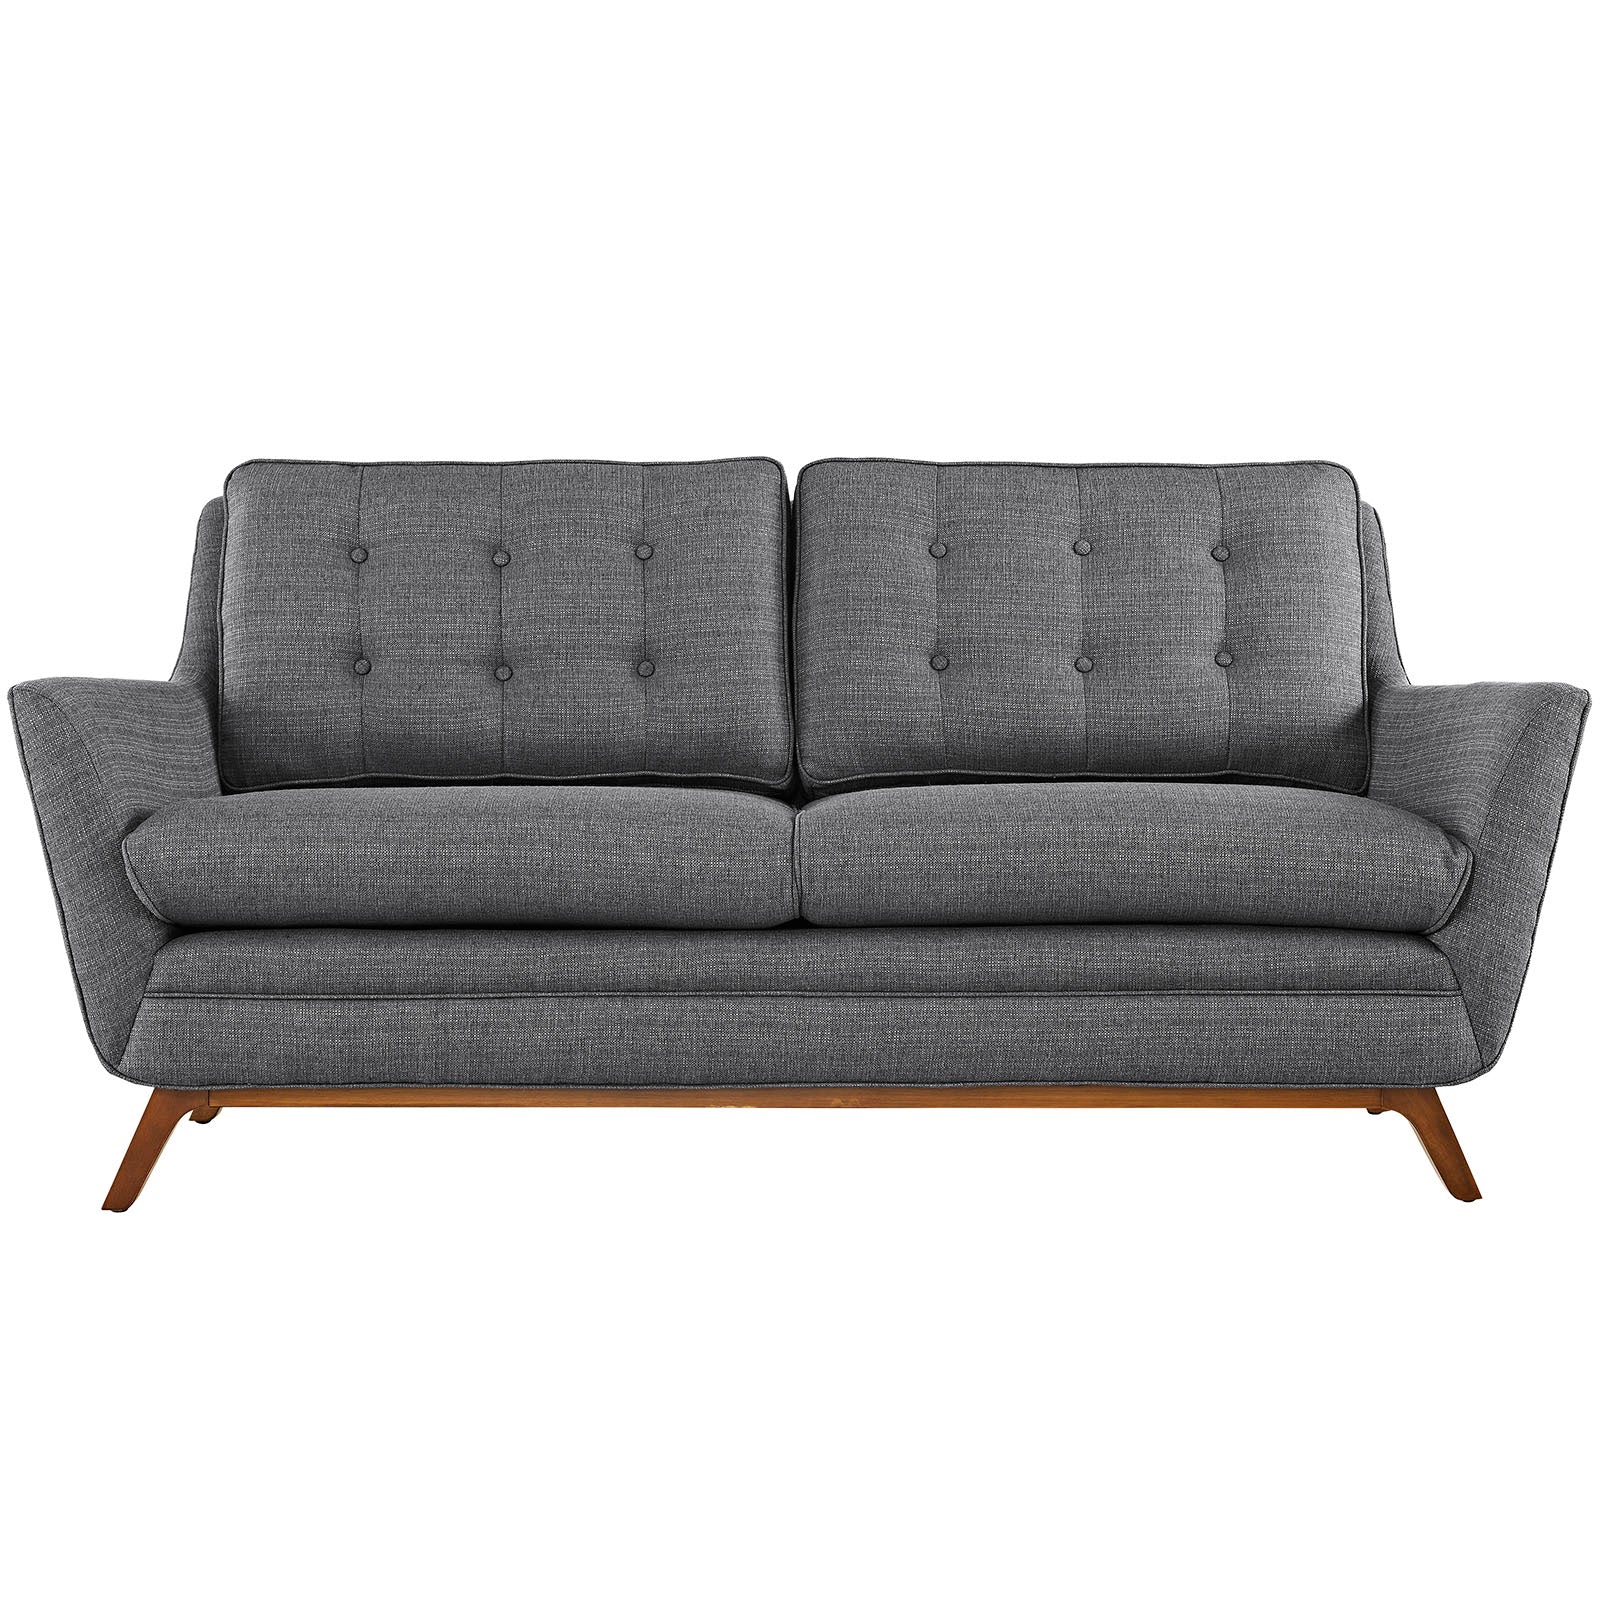 Modway Loveseats - Beguile Upholstered Fabric Loveseat Gray